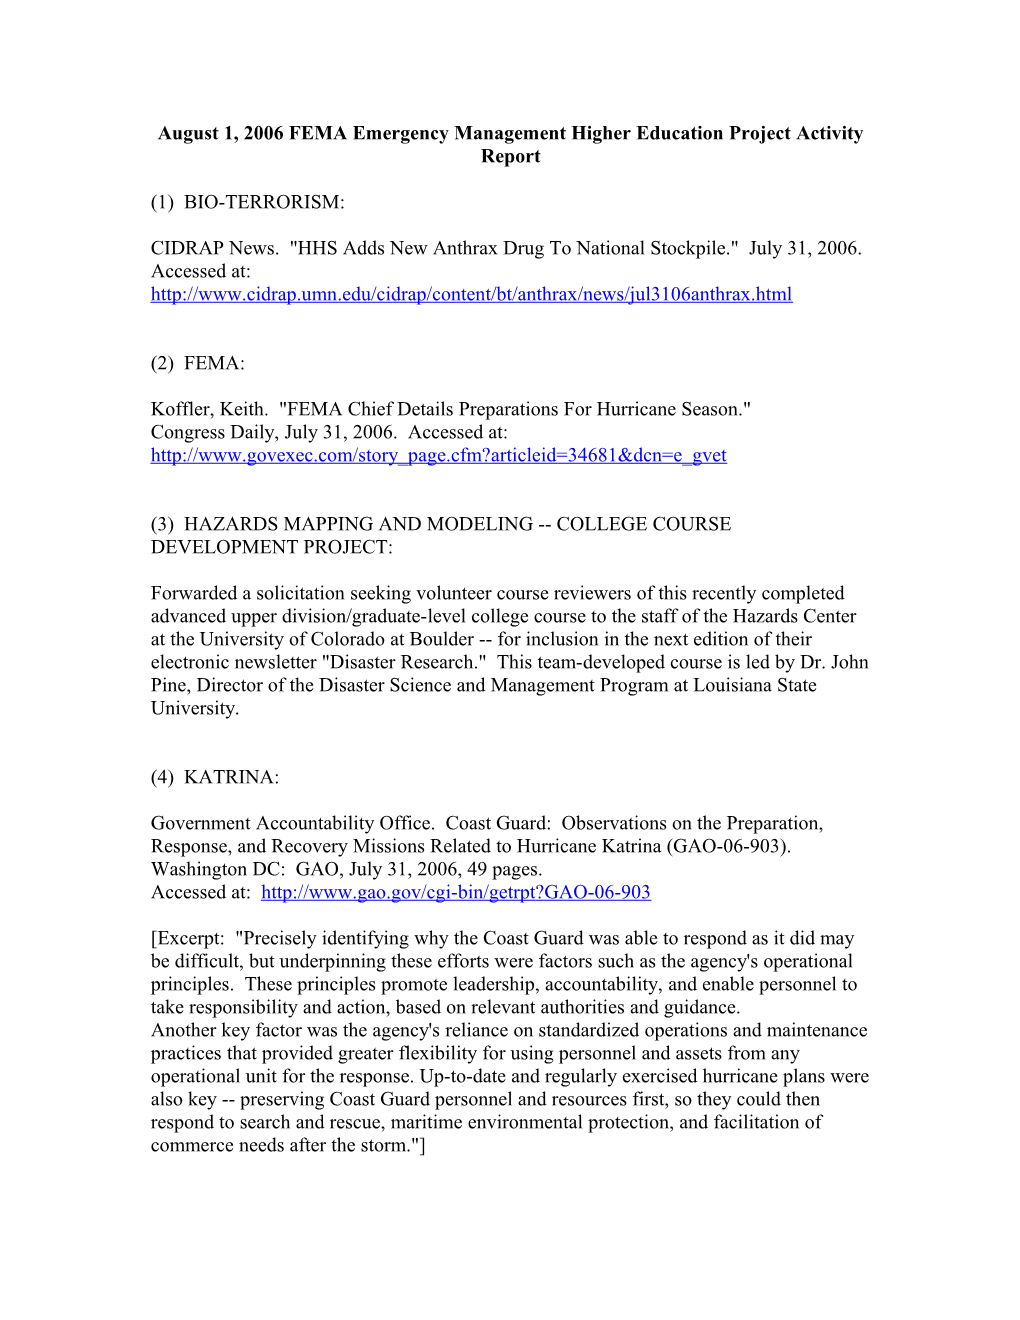 August 1, 2006 FEMA Emergency Management Higher Education Project Activity Report